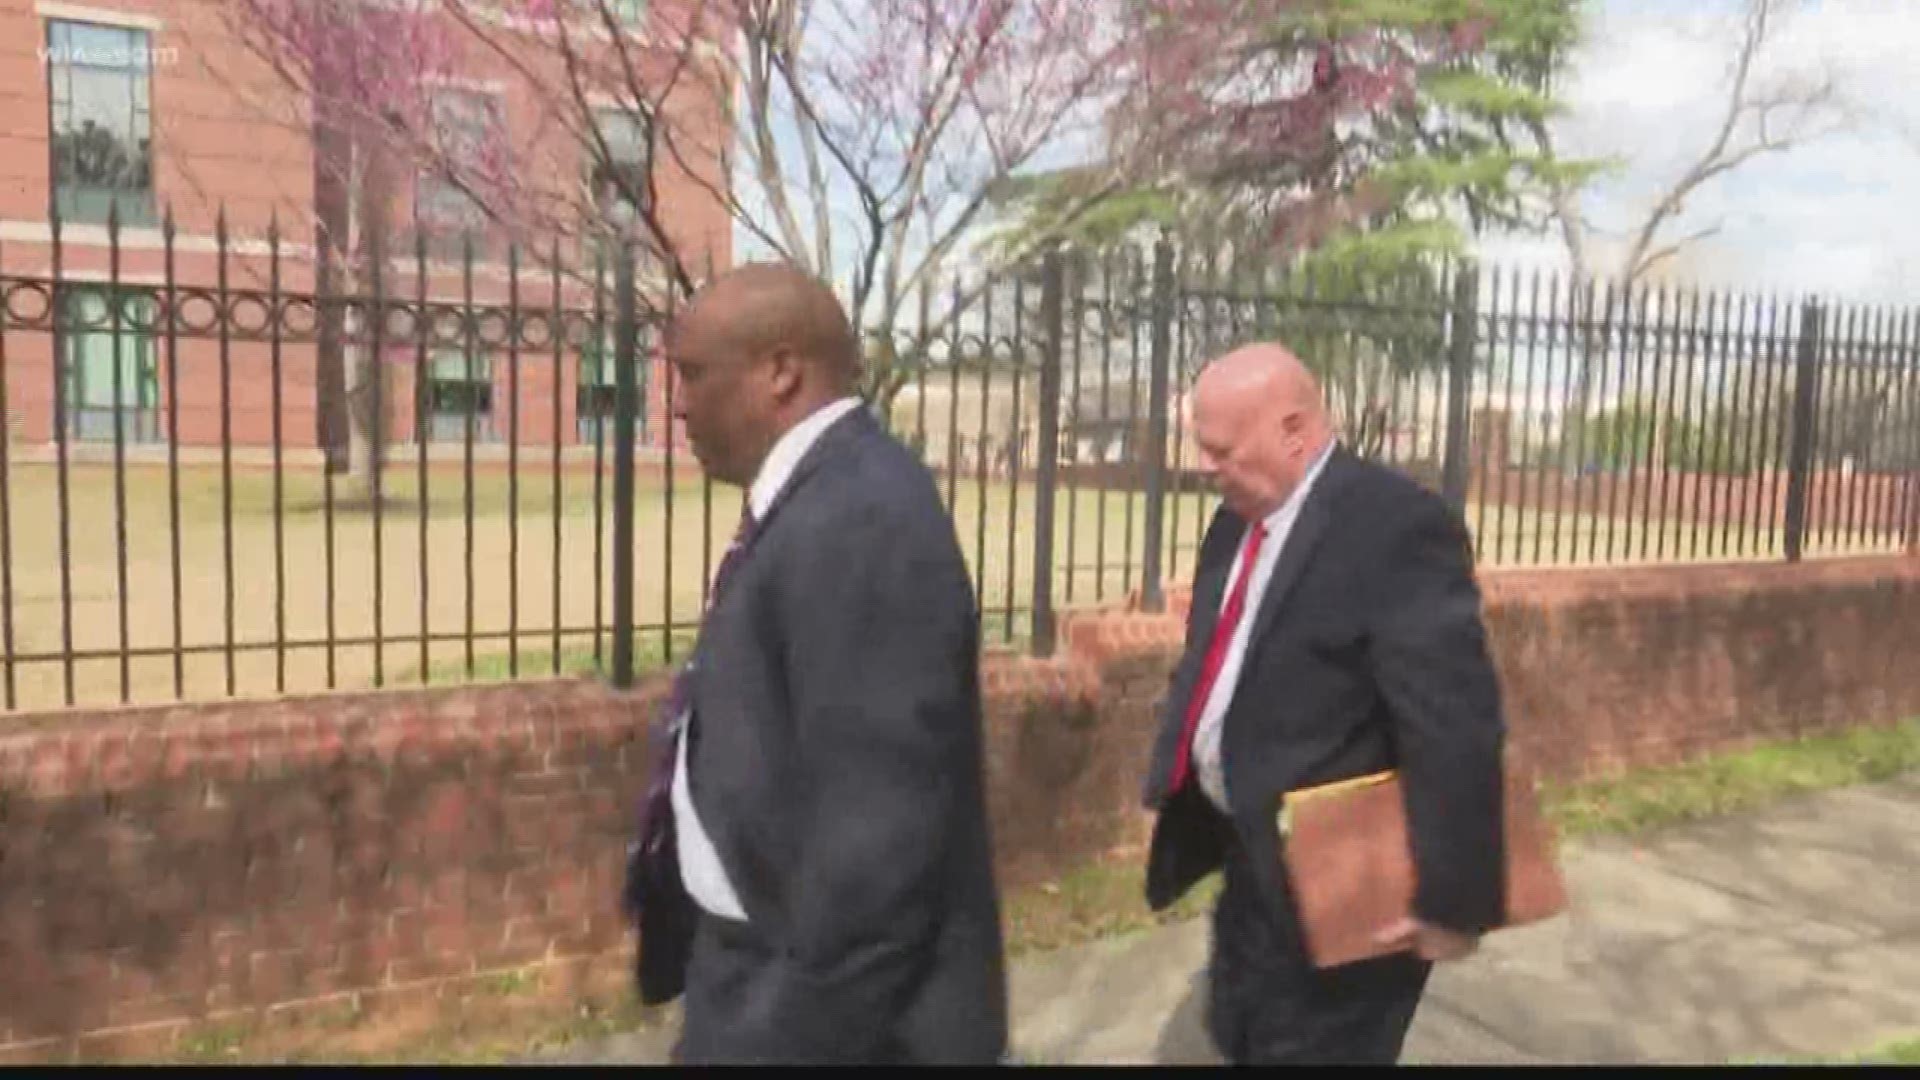 Former 5th circuit Solicitor Dan Johnson plead guilty to taking public money for hotel rooms and a plane ticket.